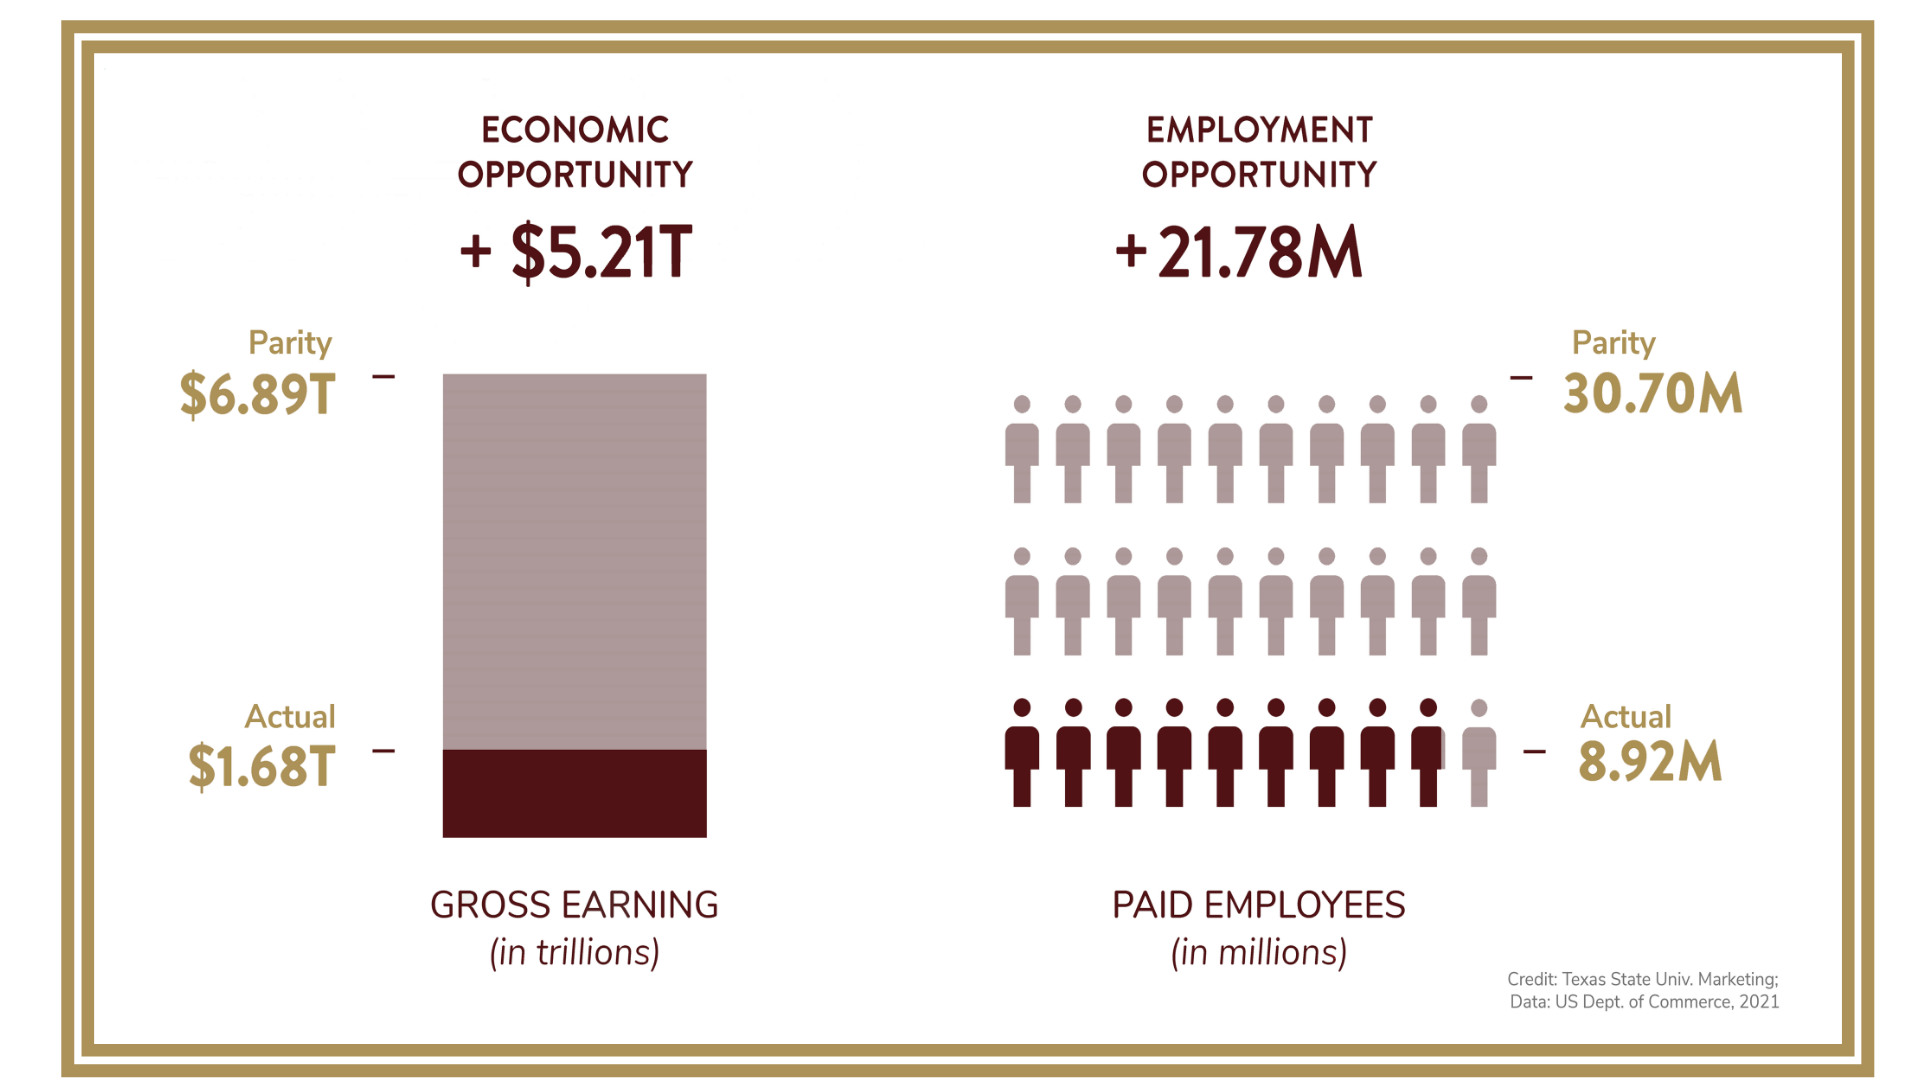 A graphical representation of the opportunity gap created by slow minority business growth.